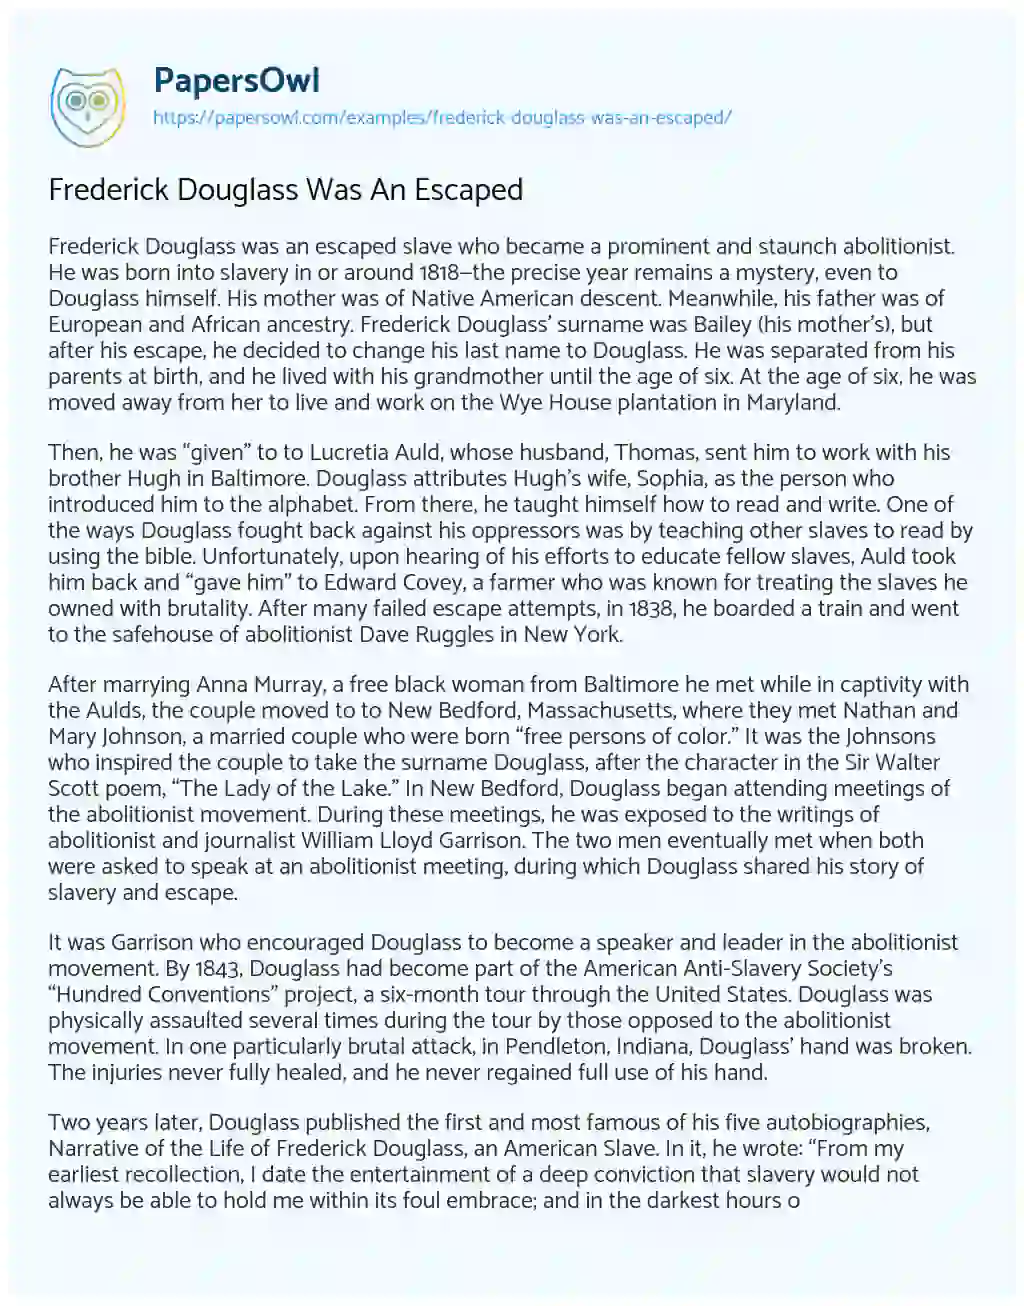 Essay on Frederick Douglass was an Escaped